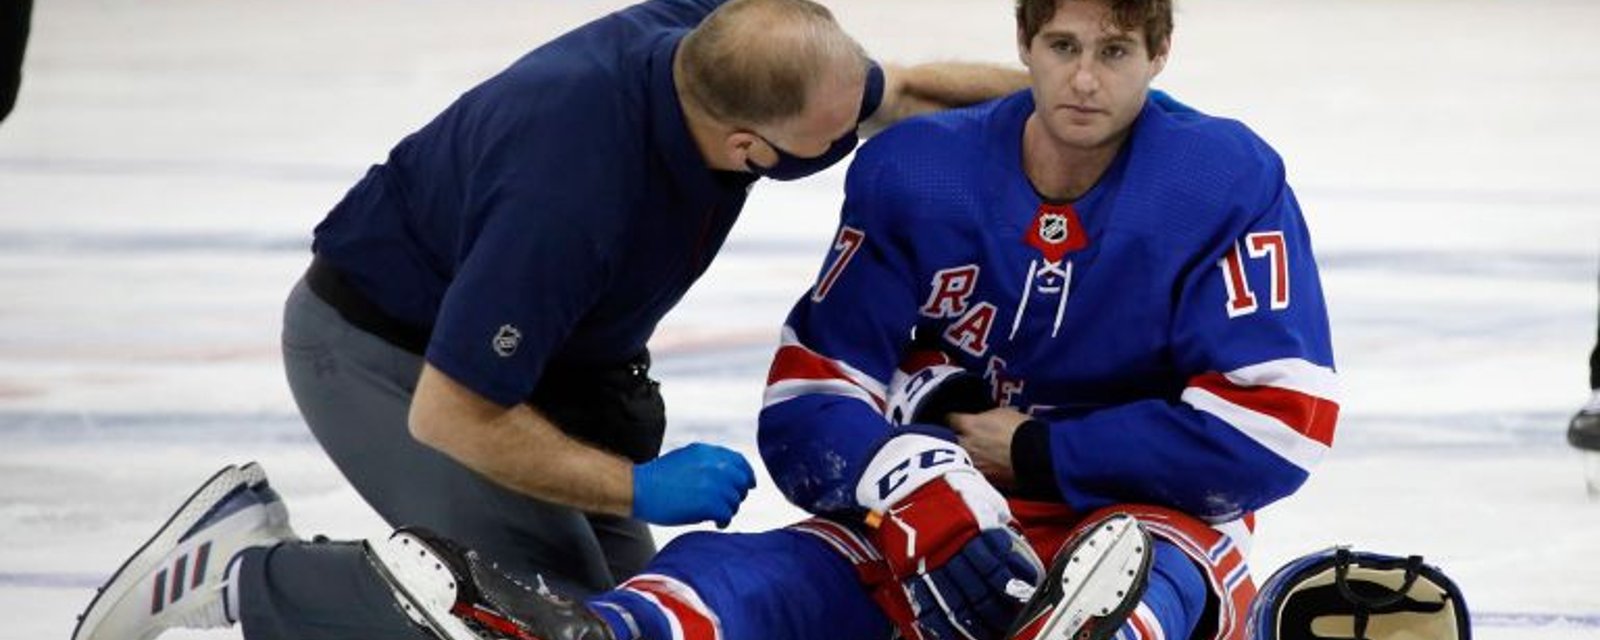 Rangers' DeAngelo demoted after humiliating performance in season opener